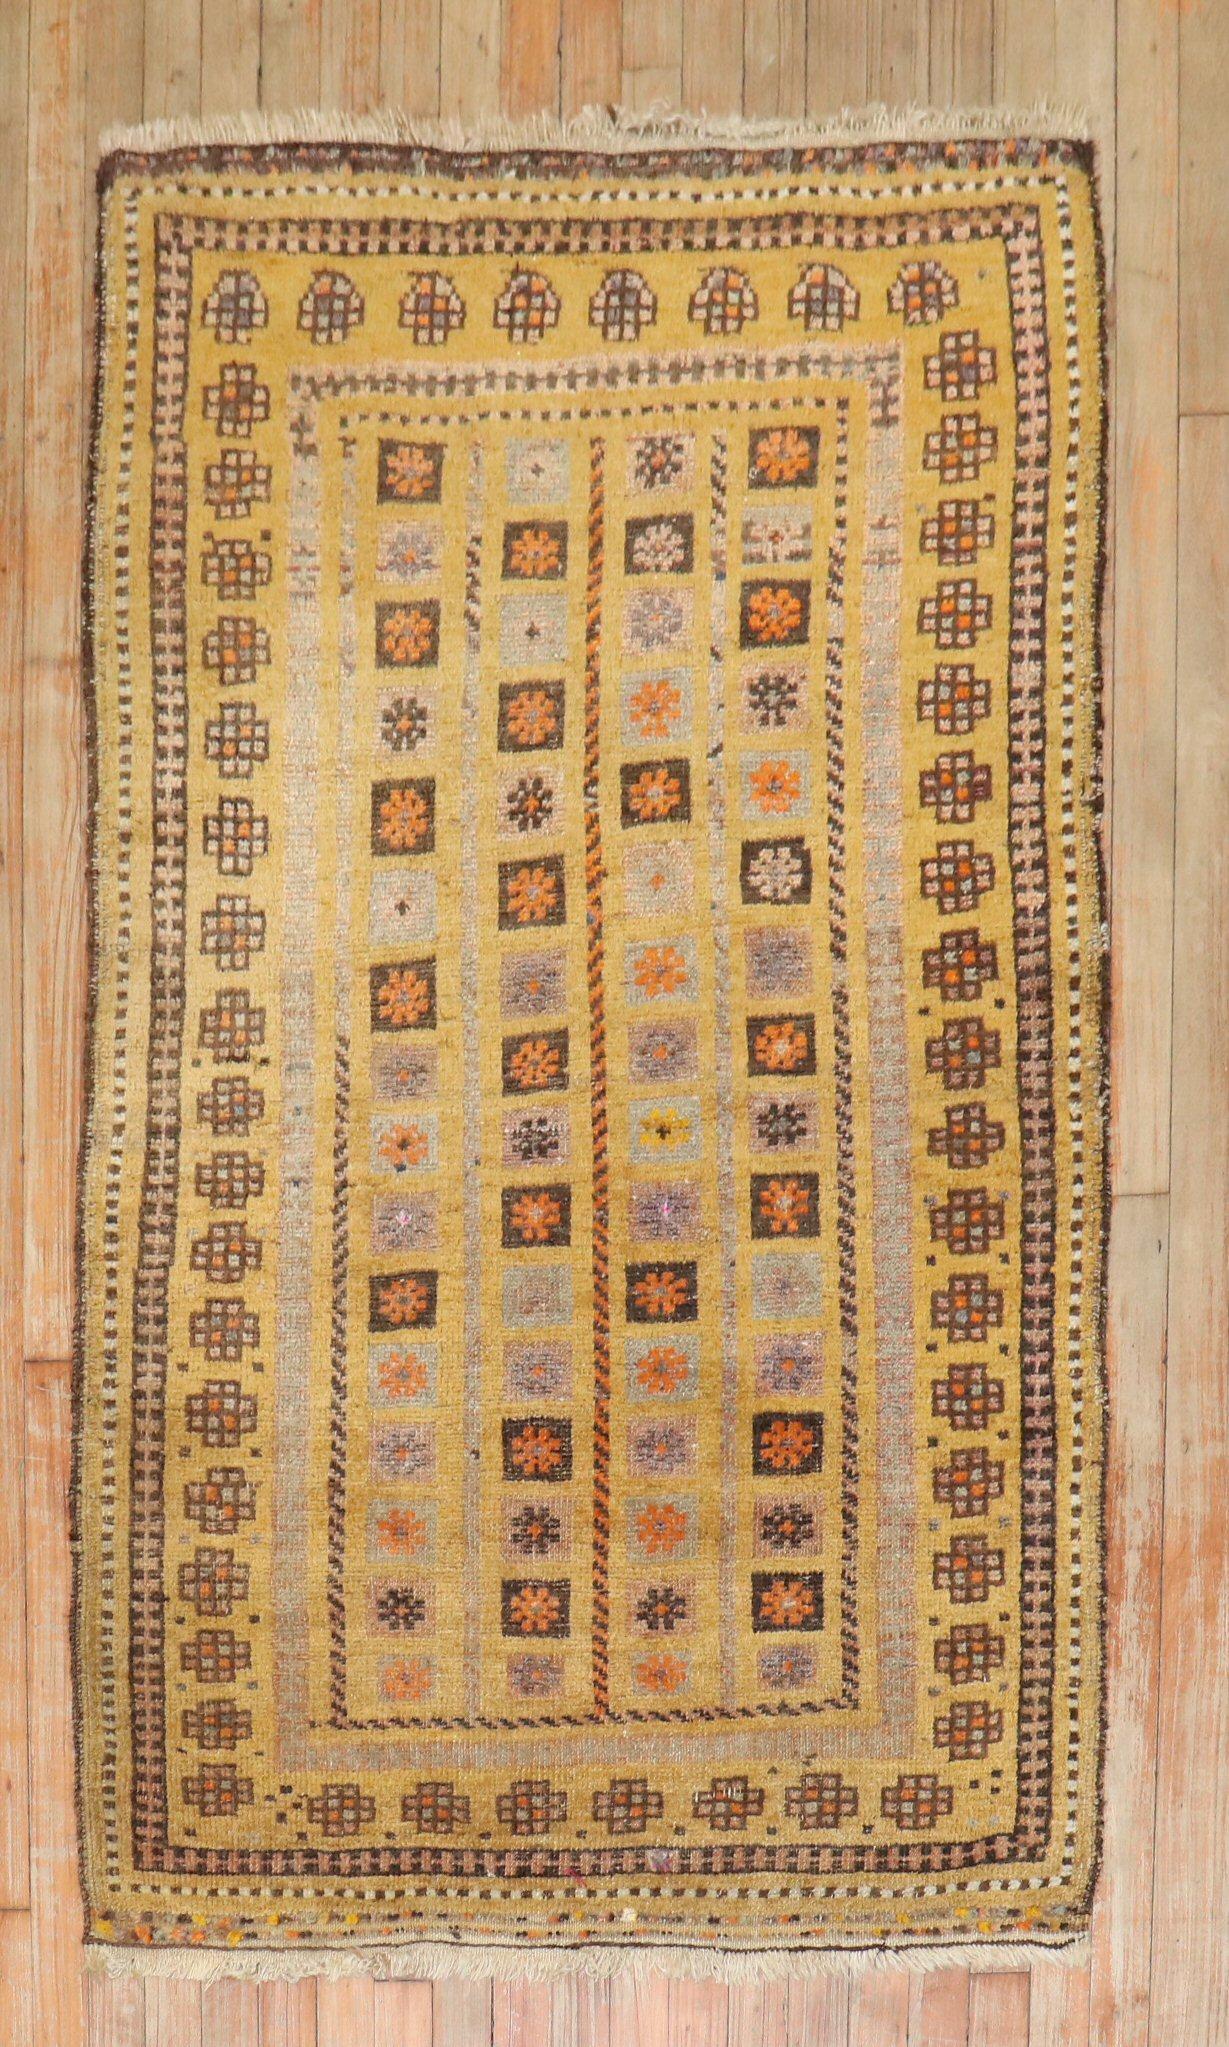 An early 20th Mustard Color Antique Baluch scatter size rug

3'3'' x 5'2''